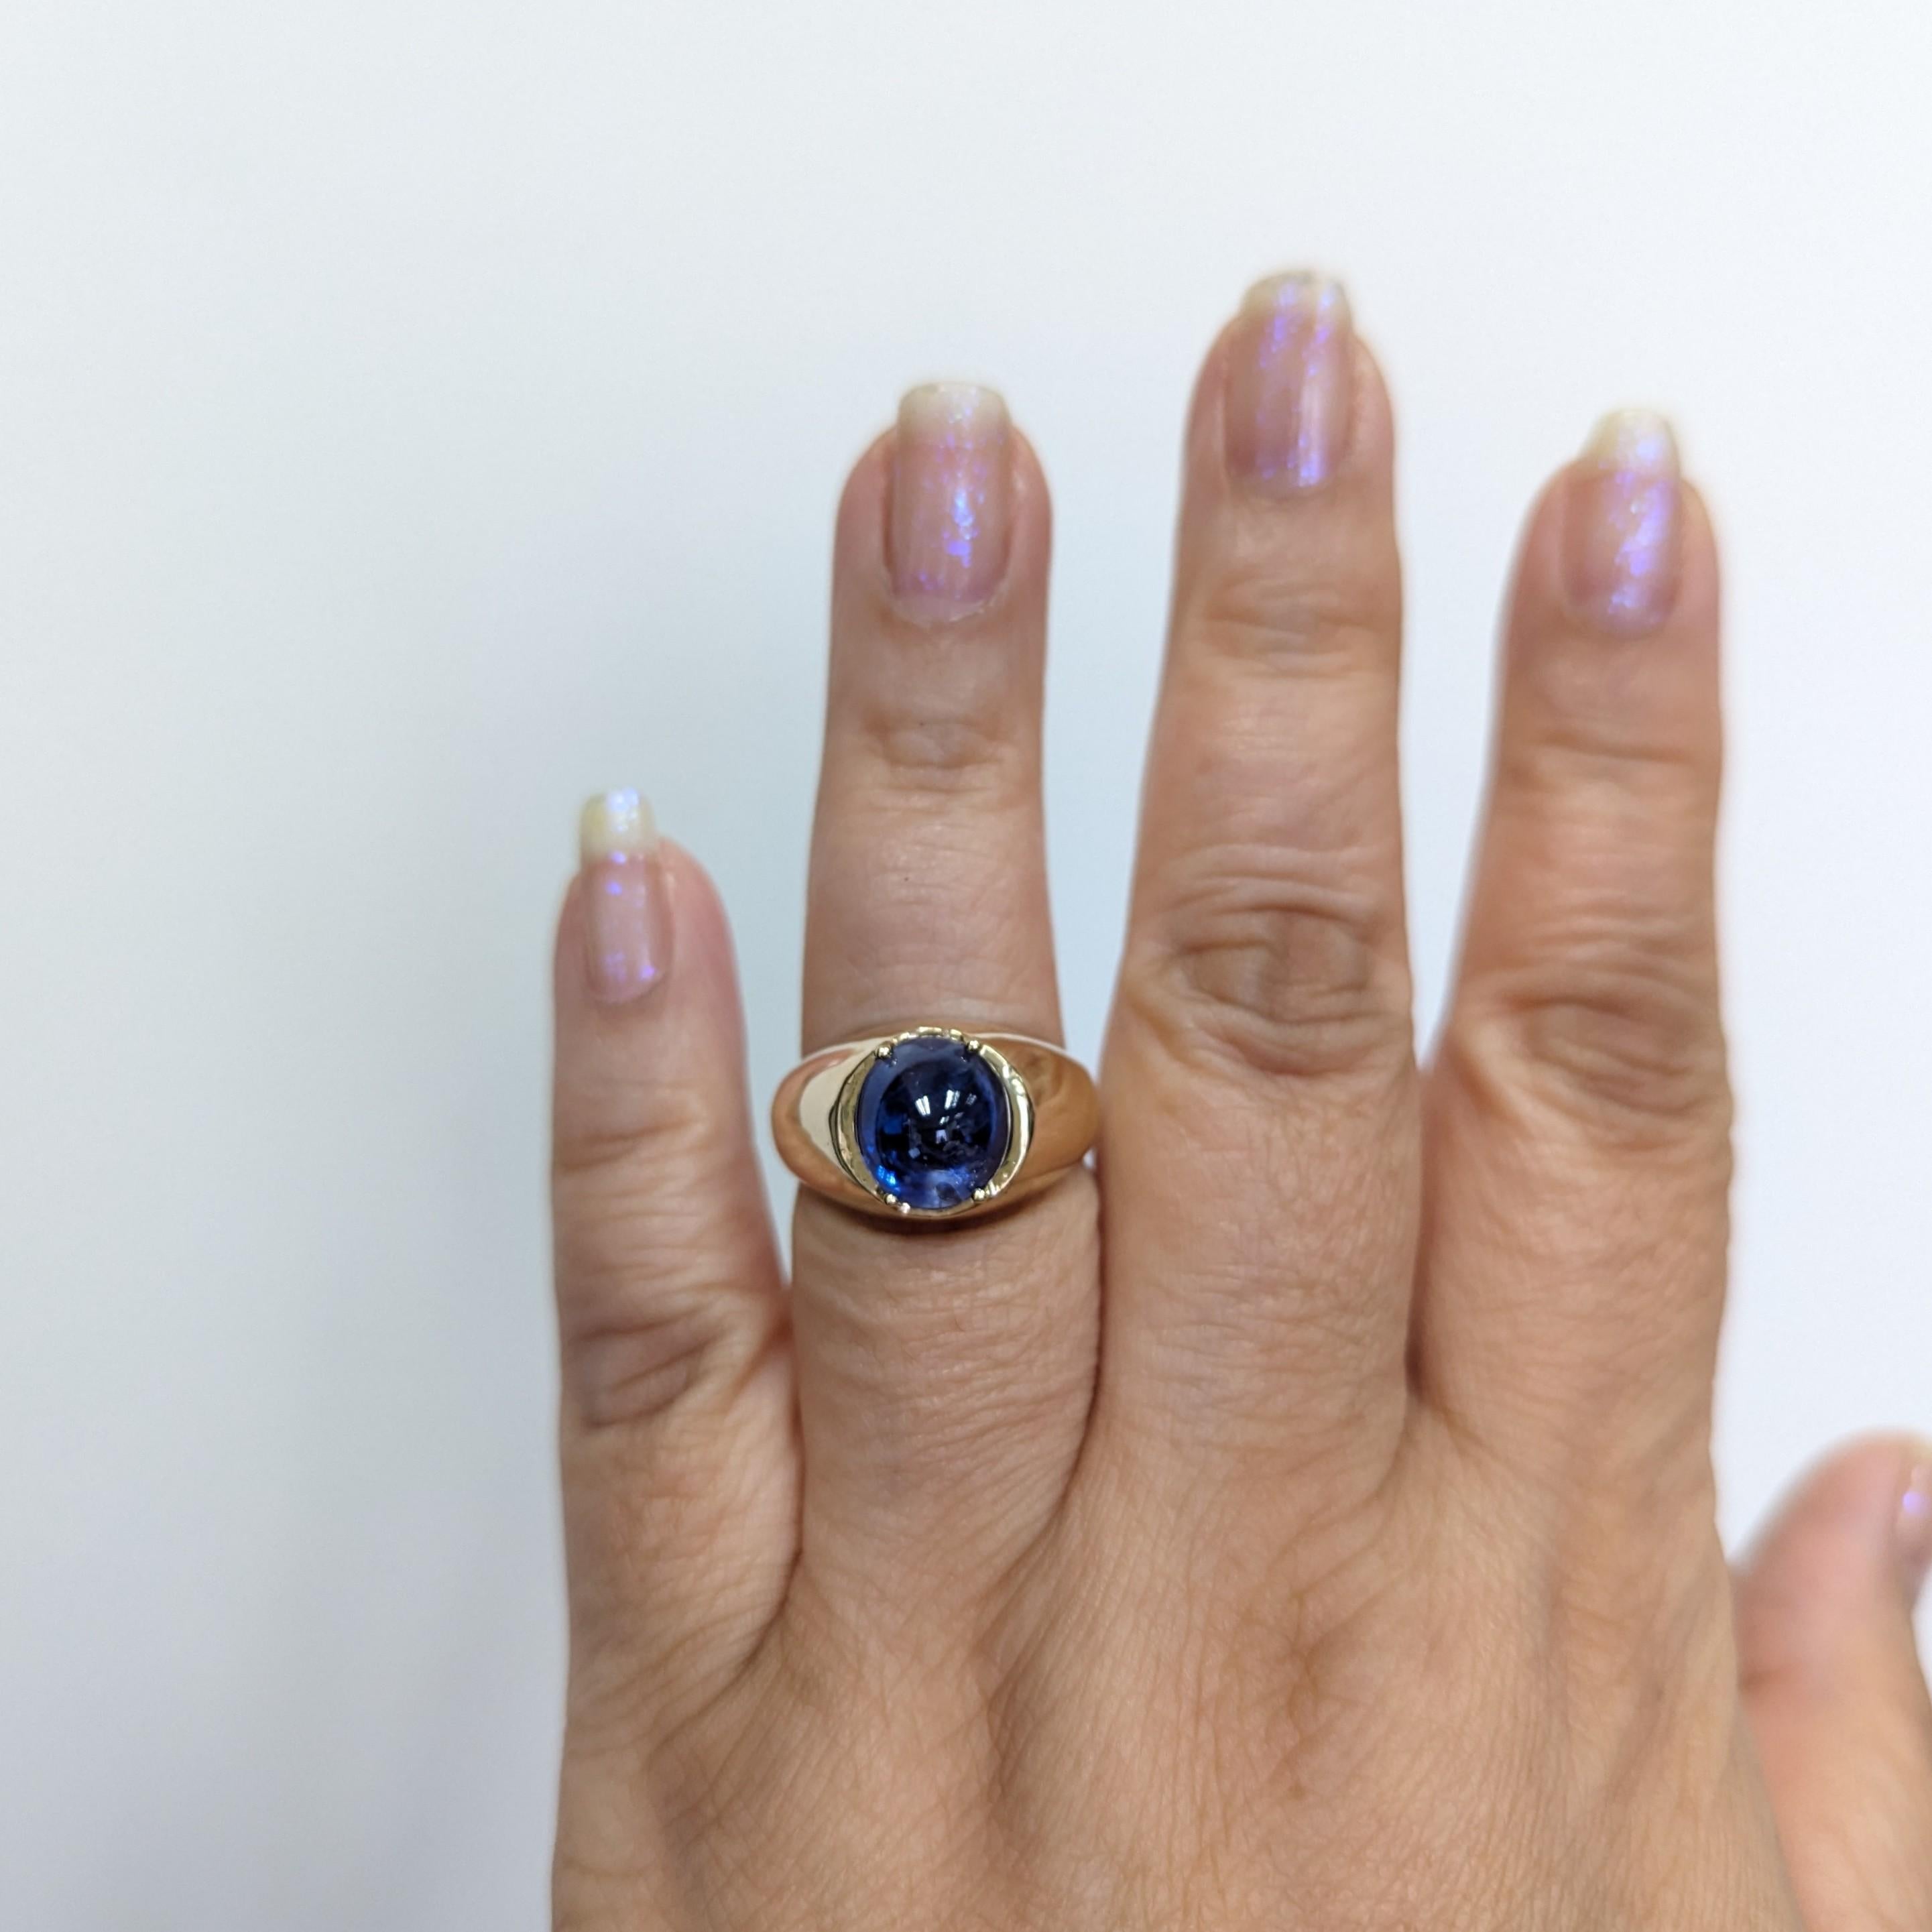 Beautiful 6.59 ct. blue sapphire oval cabochon handmade in 14k yellow gold.  Ring size 7.75.